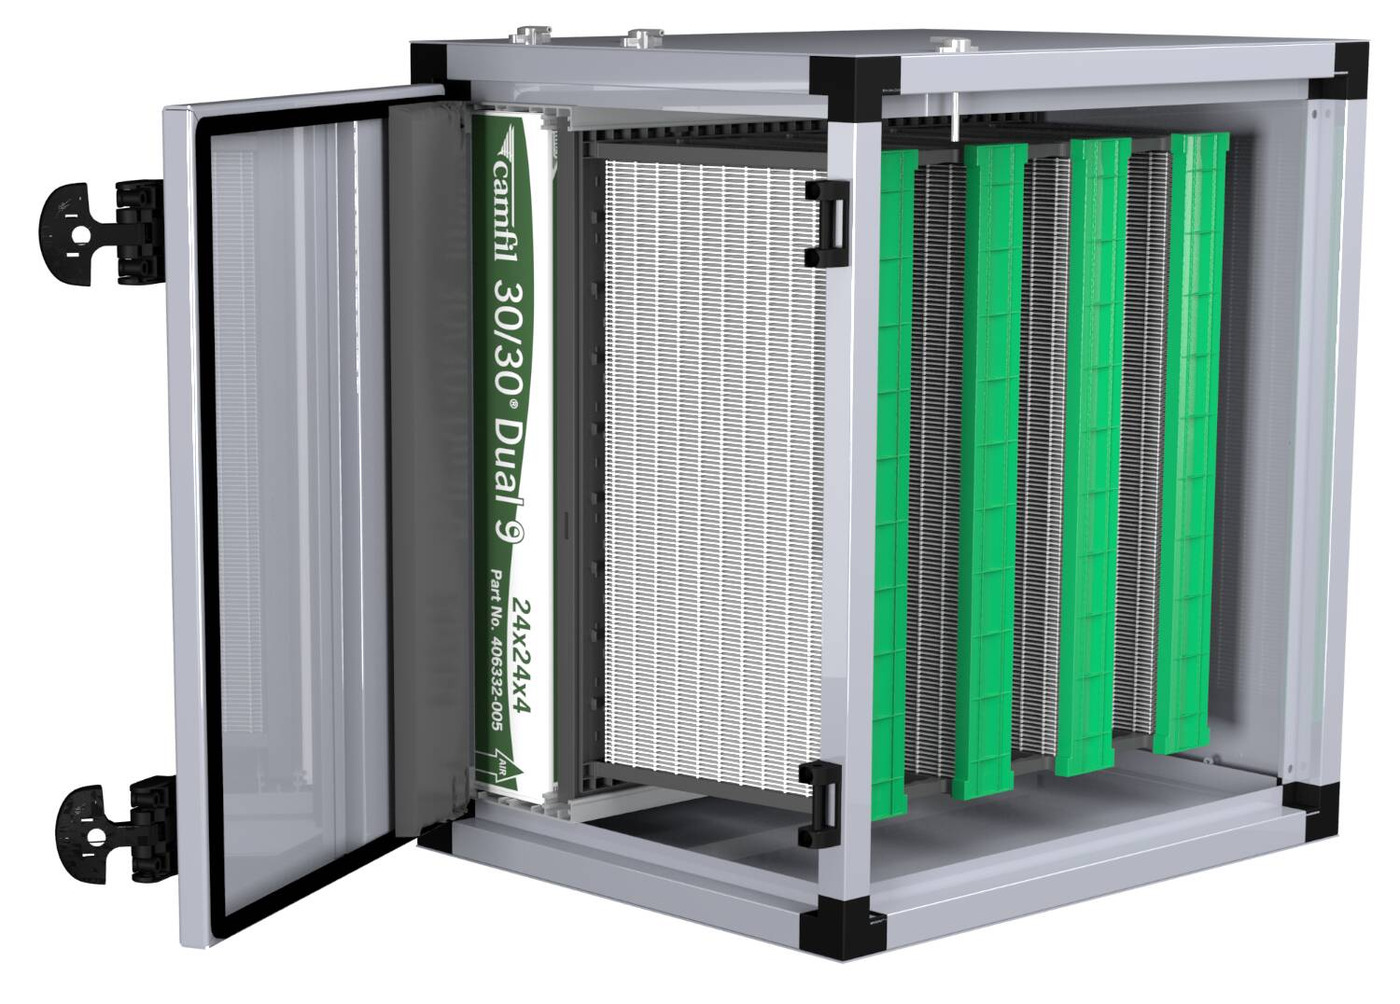 Air Filtration Company Camfil Launches GlidePack MultiTrack HVAC Air Filter Housing for Medical, Commercial Applications